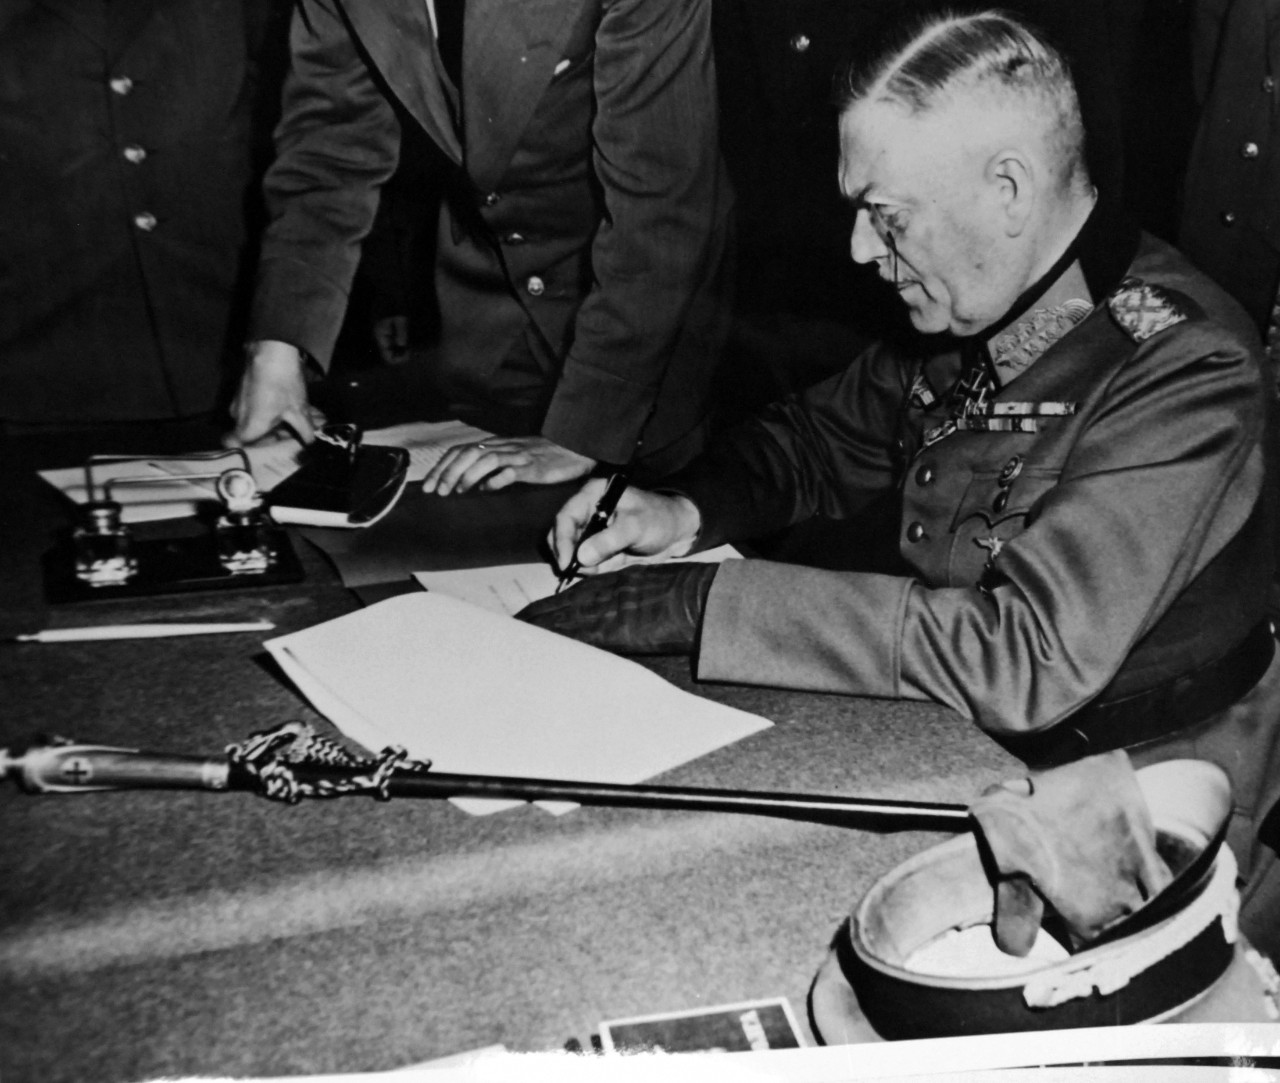 111-SC-27429:   Surrender of Germany, May 9, 1945.  Field Marshall Wilheim Keitel, signing the ratified surrender terms for the Germany Army at Russian Headquarters in Berlin. U.S. Army photograph.  Courtesy of the Library of Congress Collection, Lot-8988. (2015/10/16).